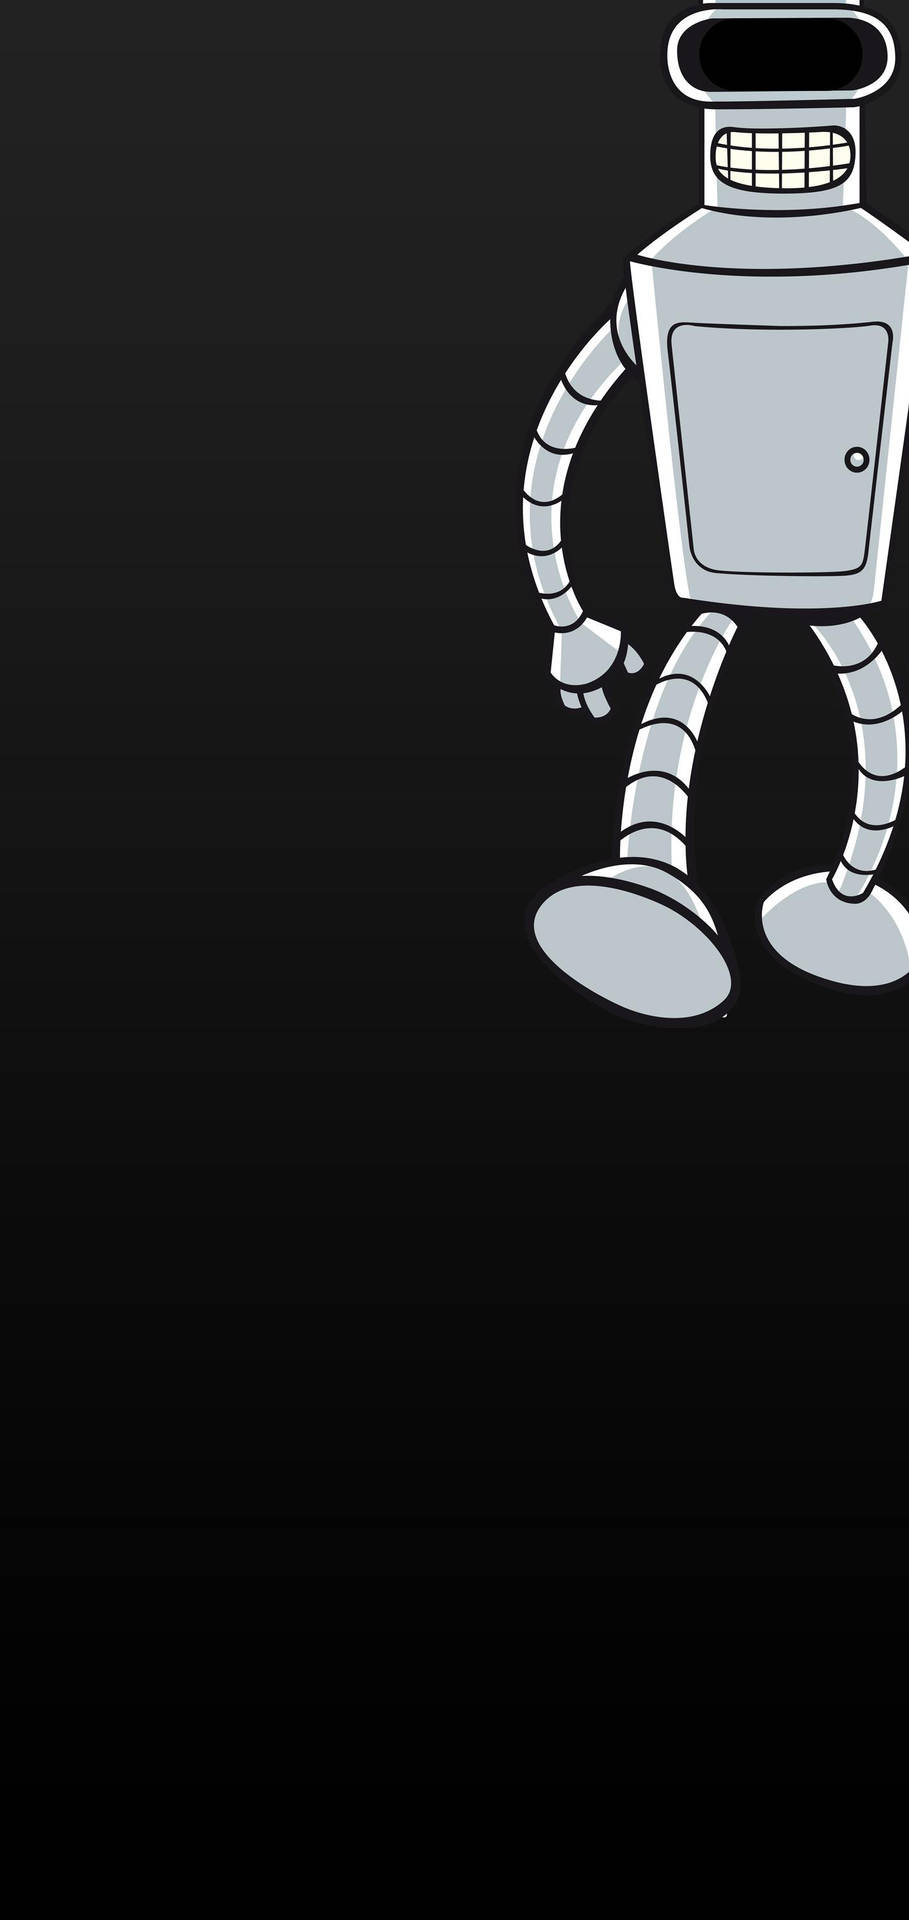 S10+ Bender From Futurama Background